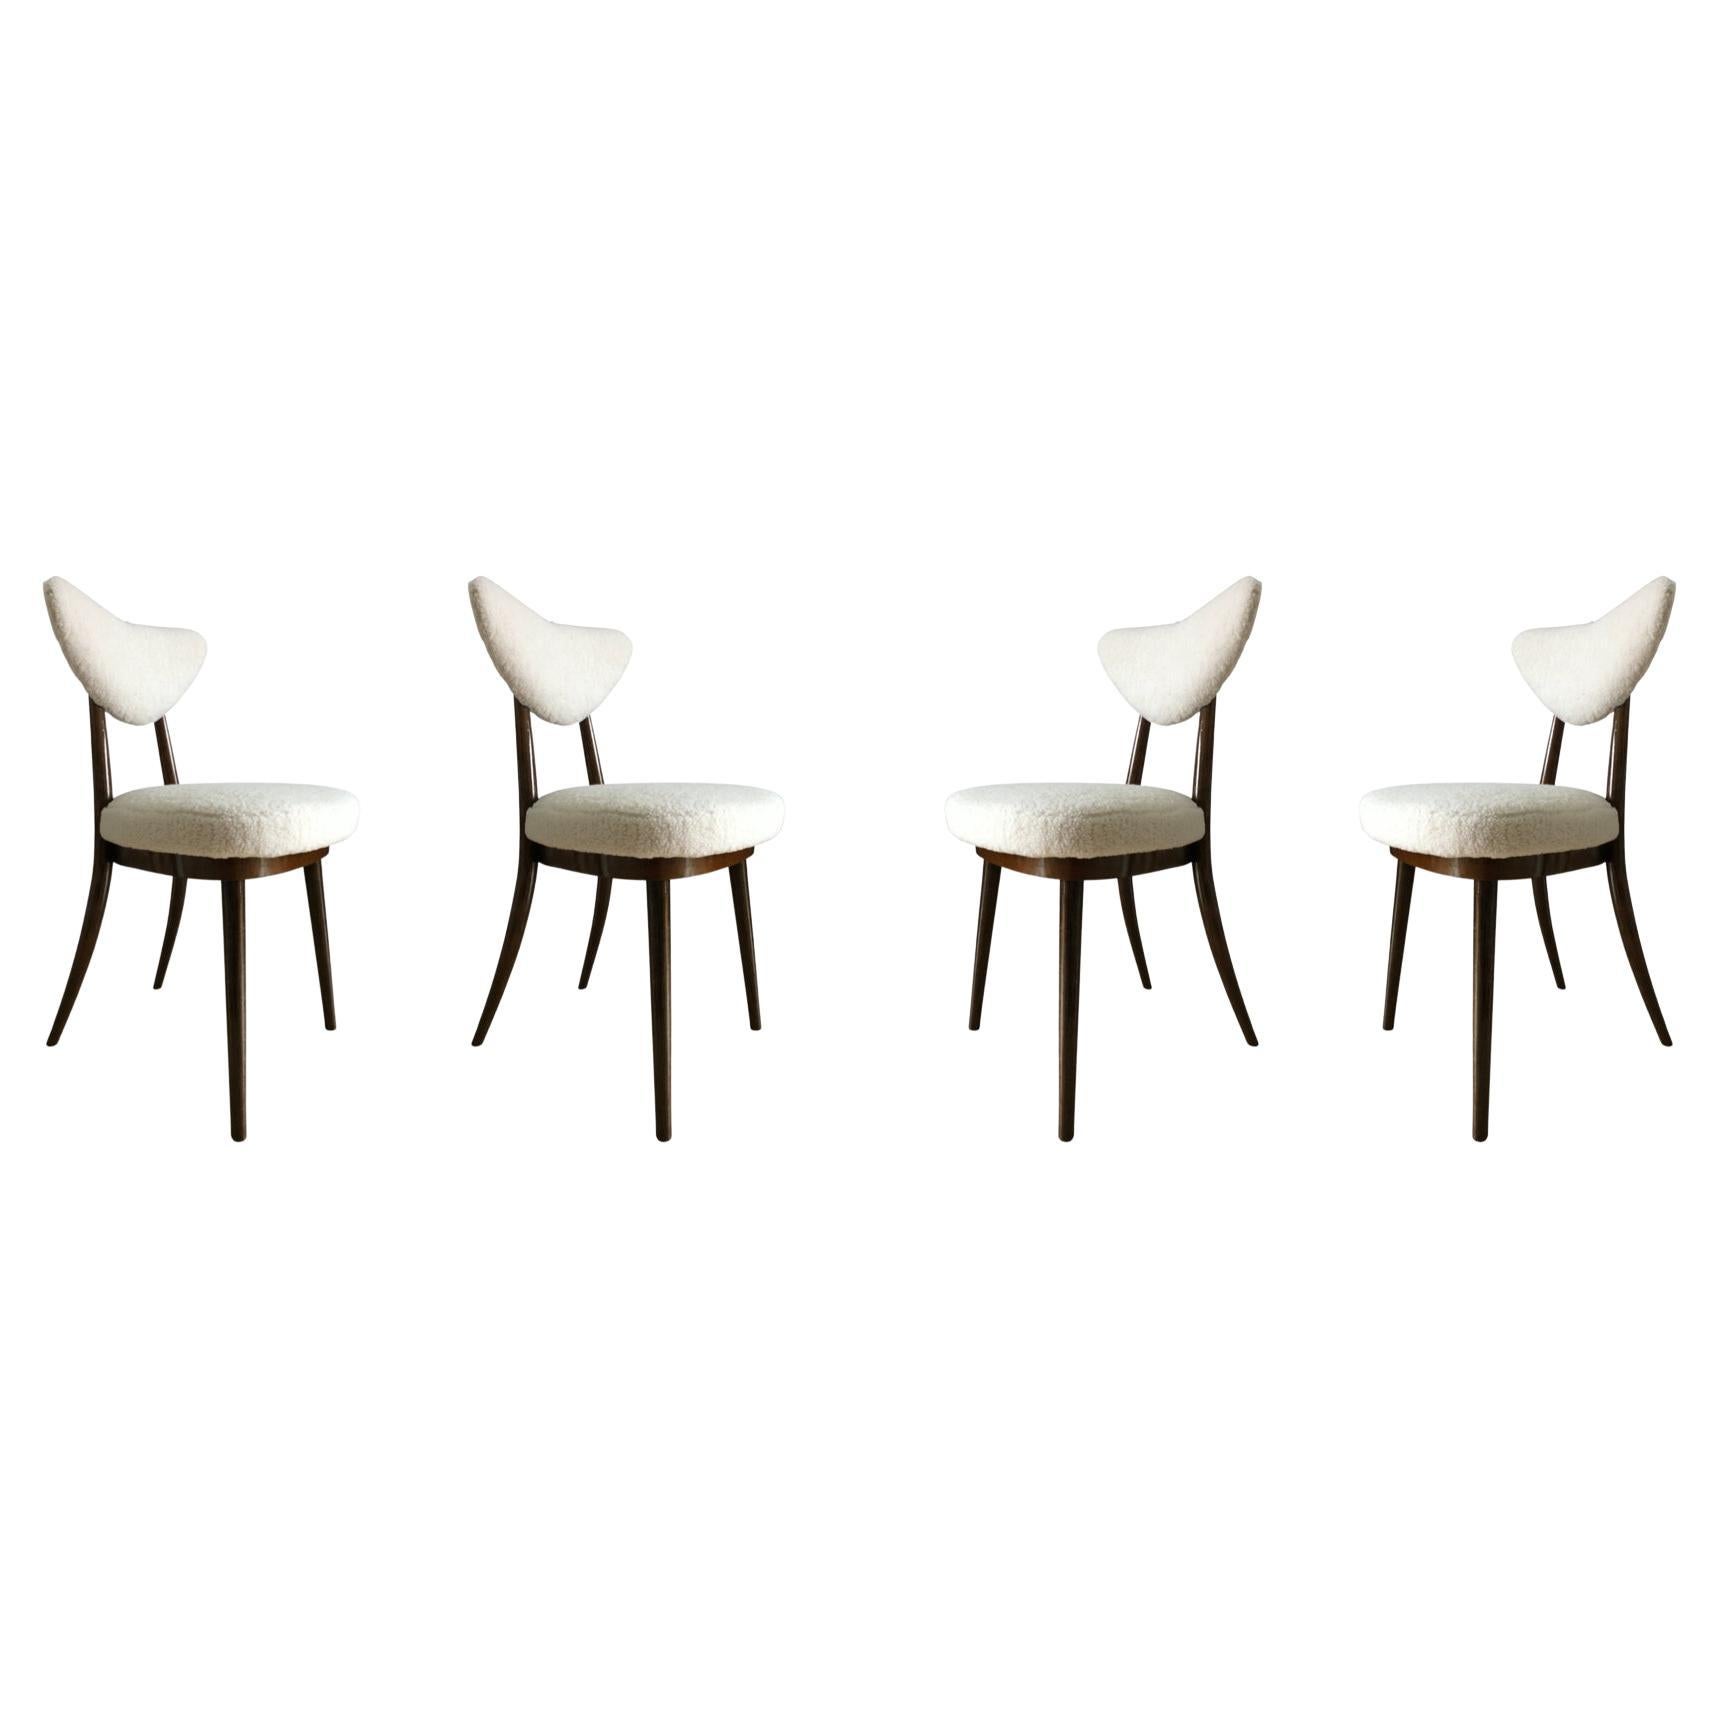 Set of Four Midcentury White bouclé Heart Chairs, by Kurmanowicz, 1960s For Sale